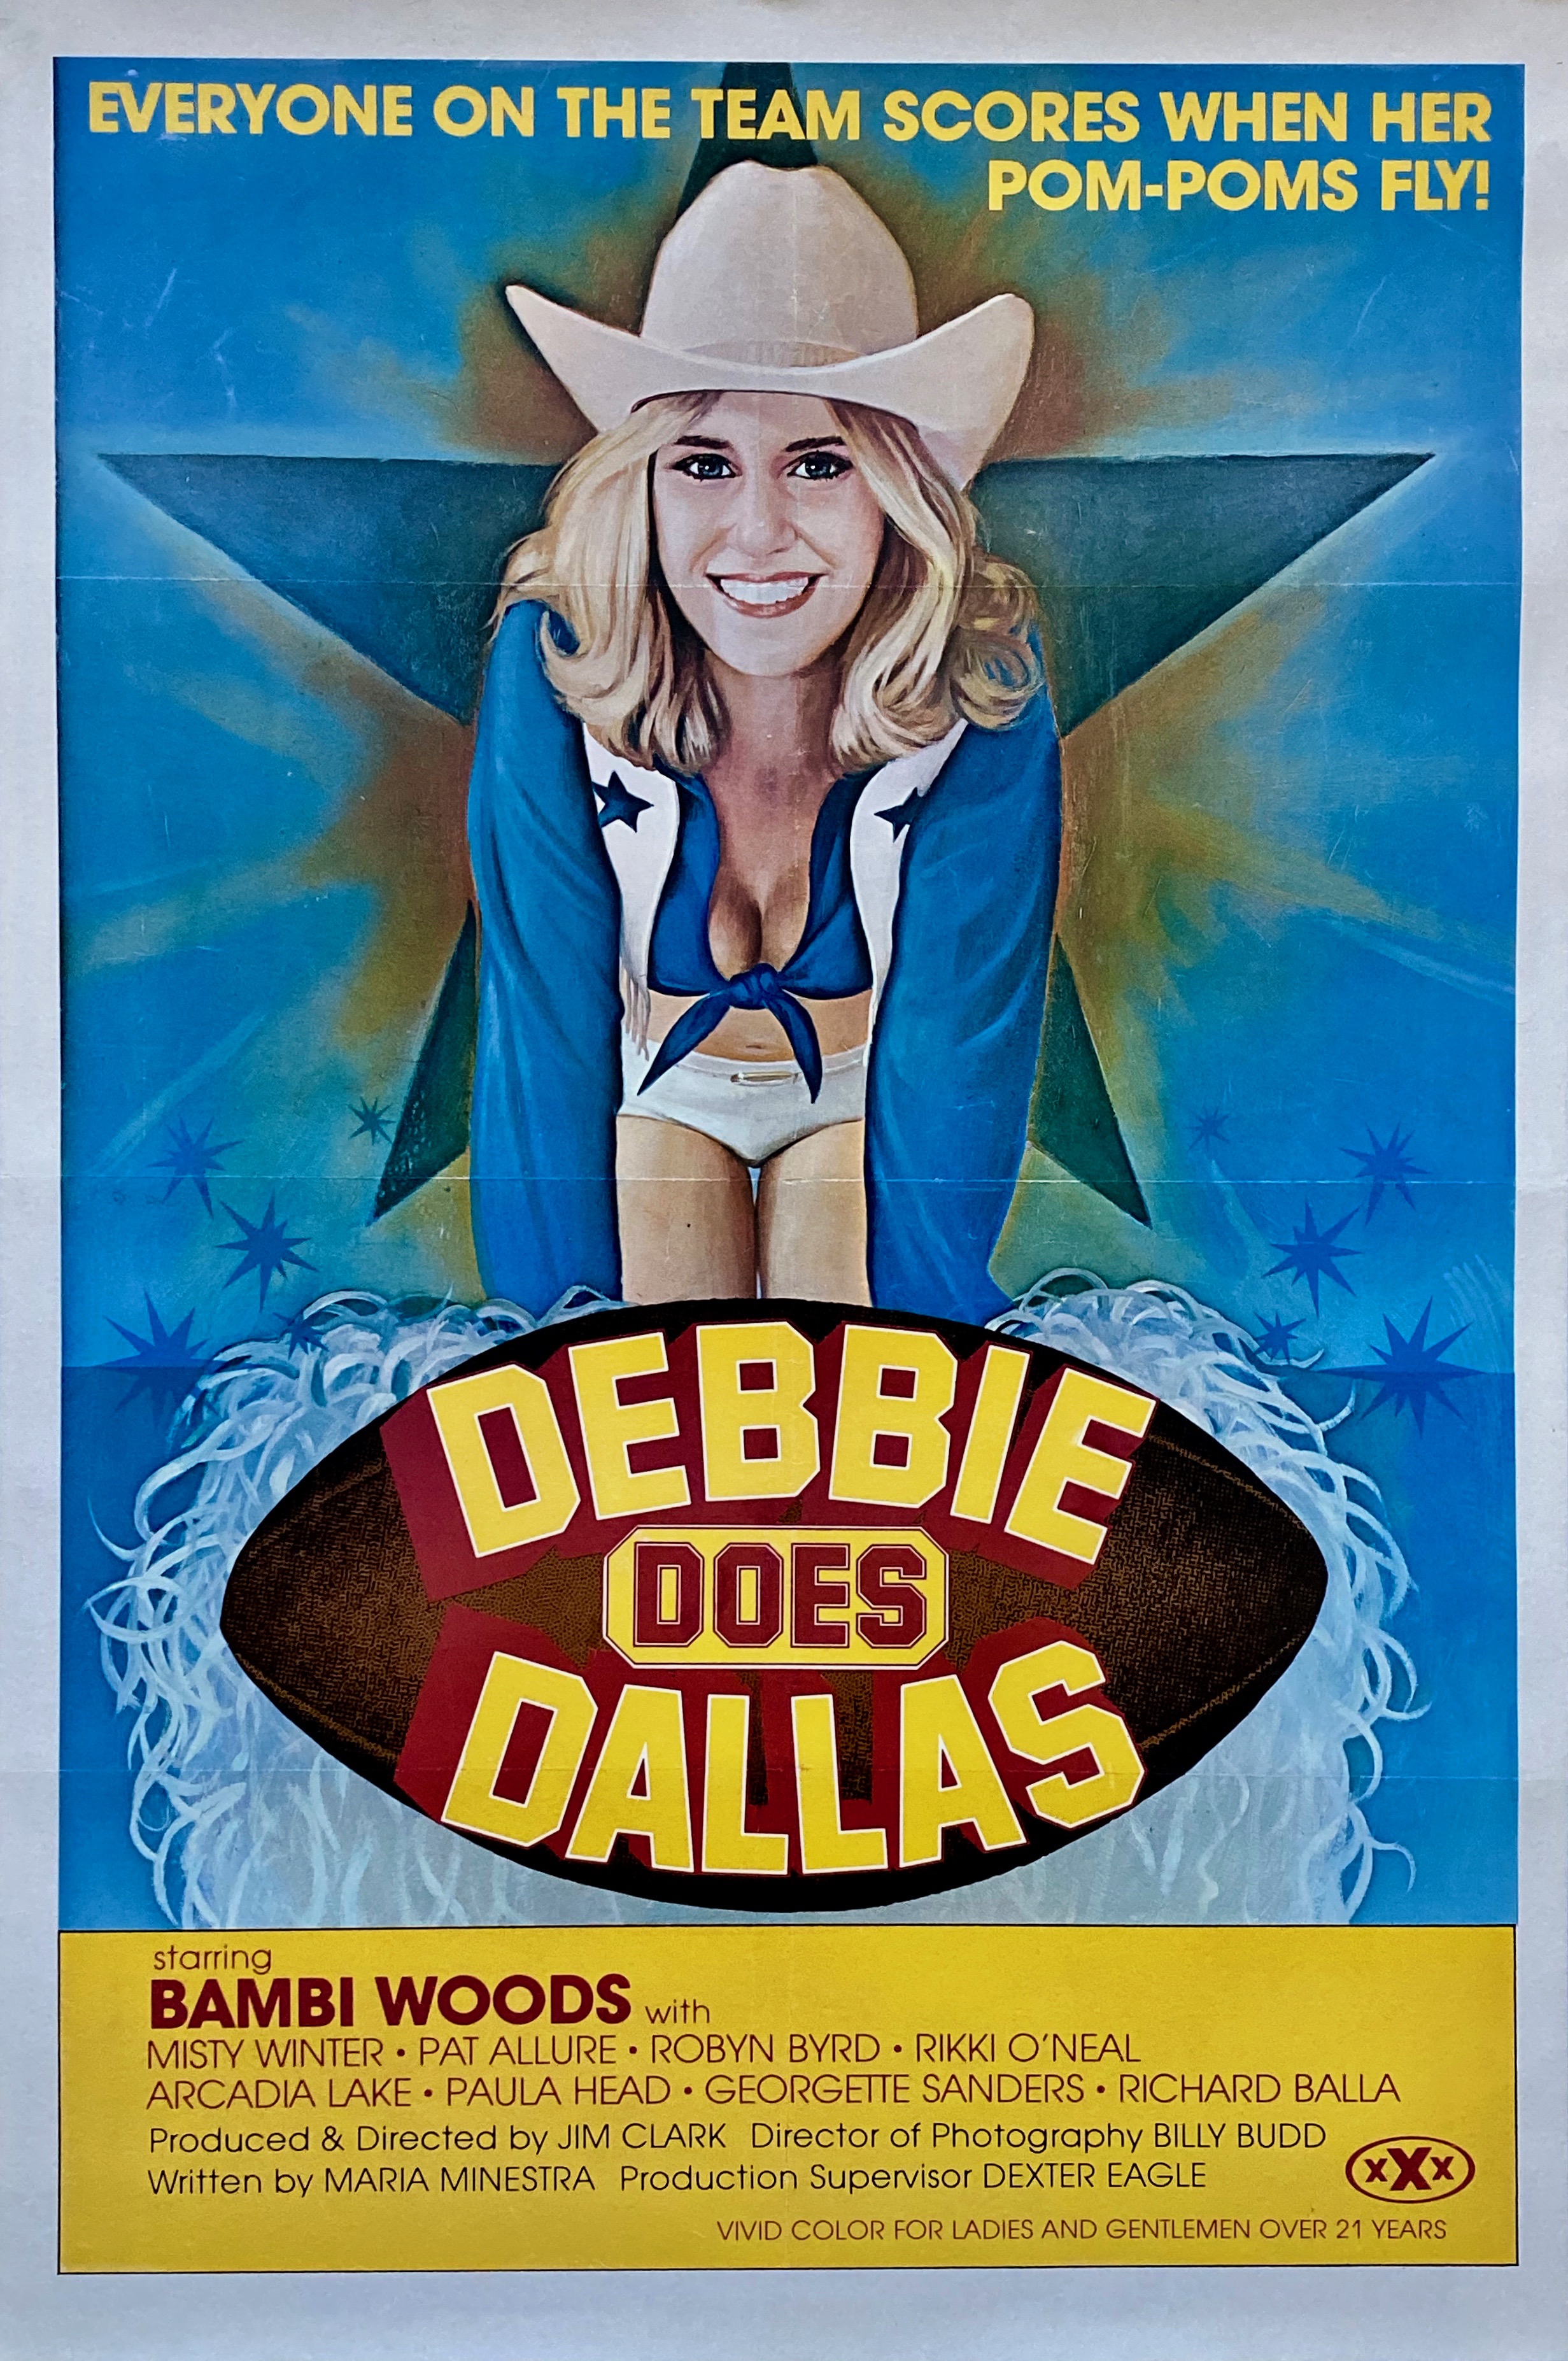 deanna rhoads recommends Debbie Does Dallas 2000